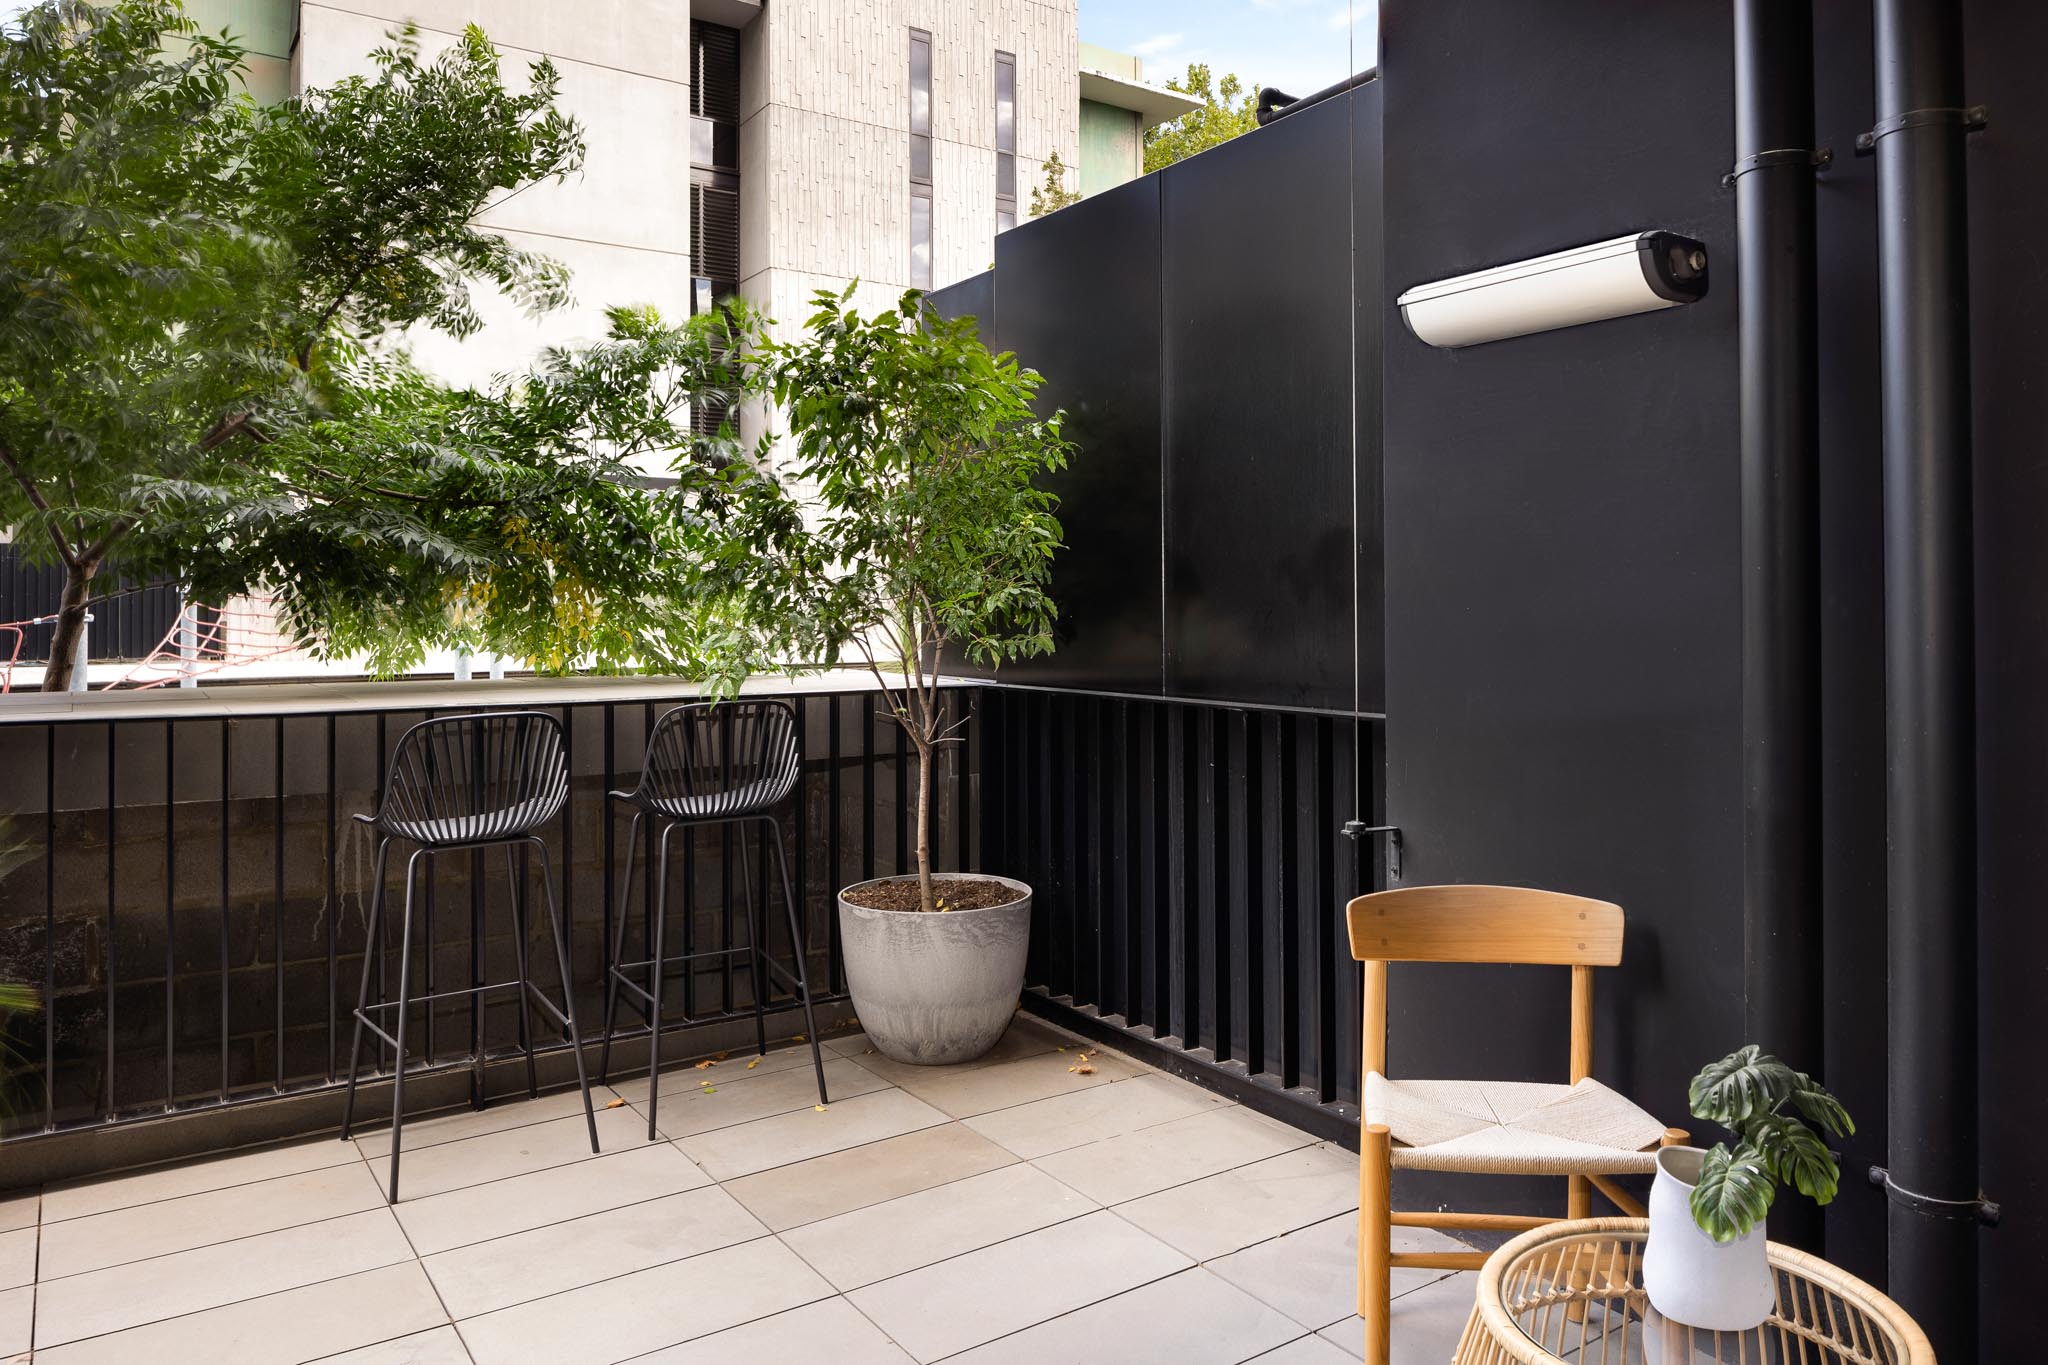 Balcony - Two Bedroom Apartment - Urban Rest- Palmerston Street Apartments Melbourne